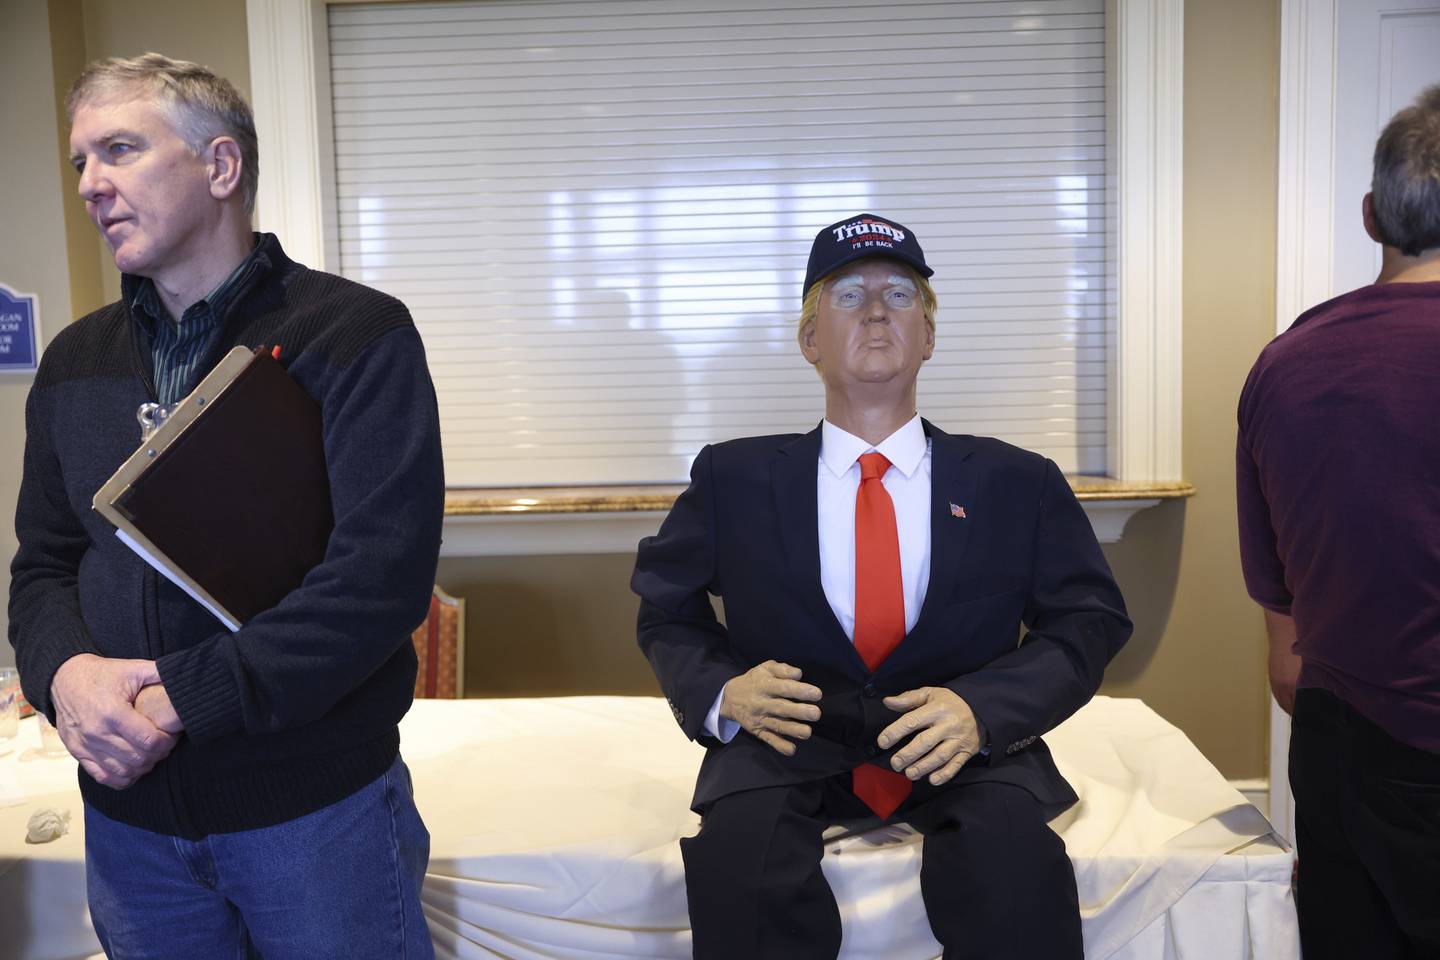 A Trump doll is displayed after a Republican State Central Committee meeting at the Bolingbrook Golf Club on Saturday, Dec. 10, 2022 in Bolingbrook.